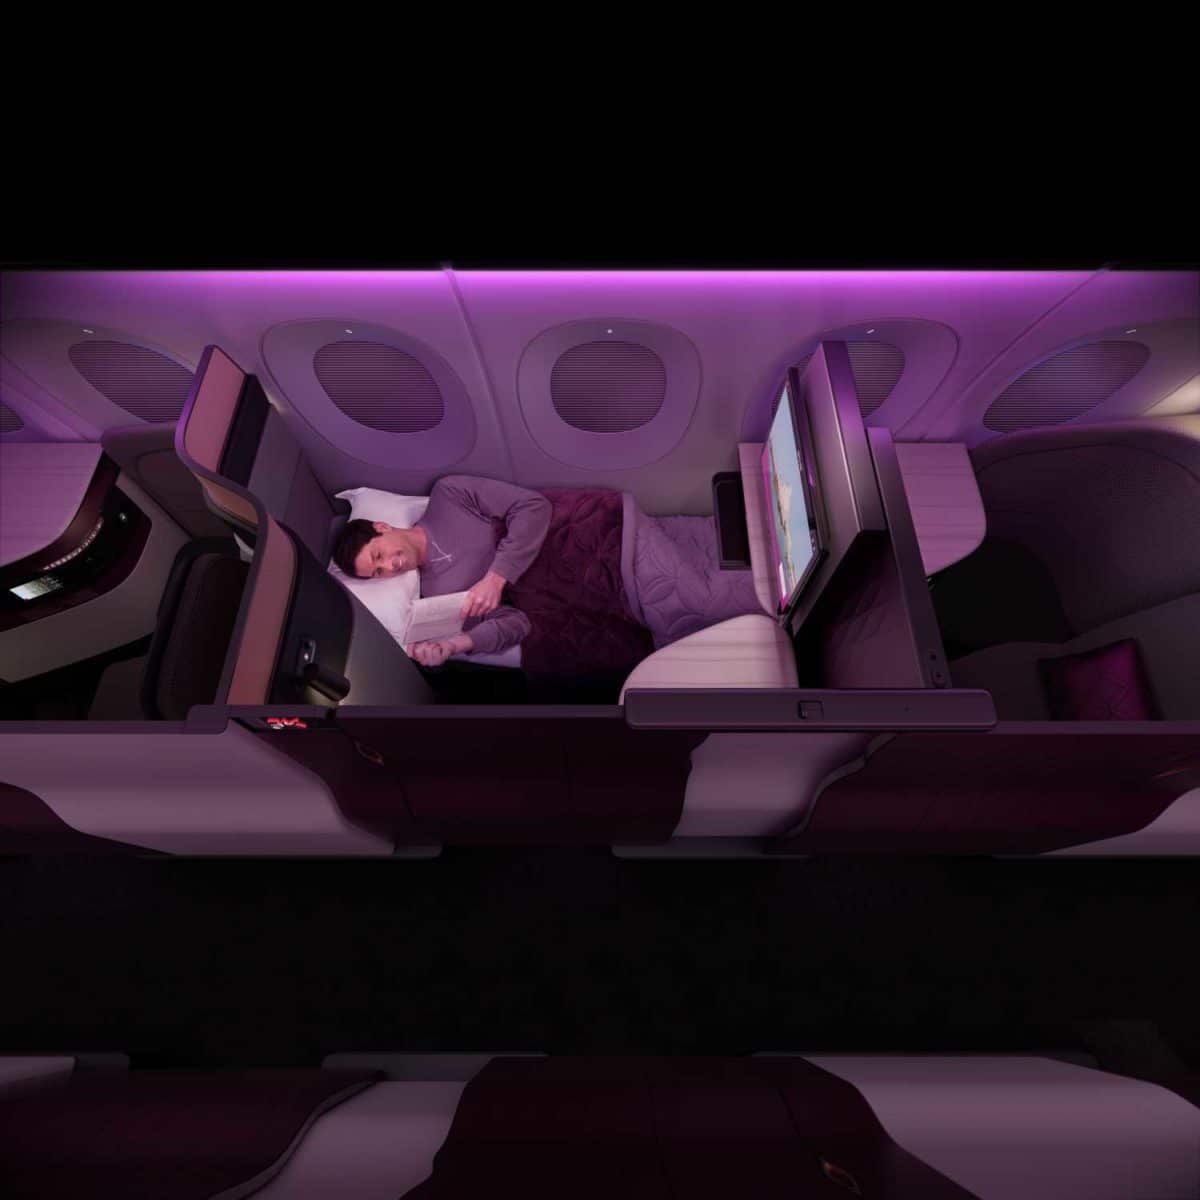 Qatar-Airways-Qsuite-business-class - Qsuite-Outboard-Single-Male-Euro-Read-BEDMODE_maleReading_20170225.jpeg